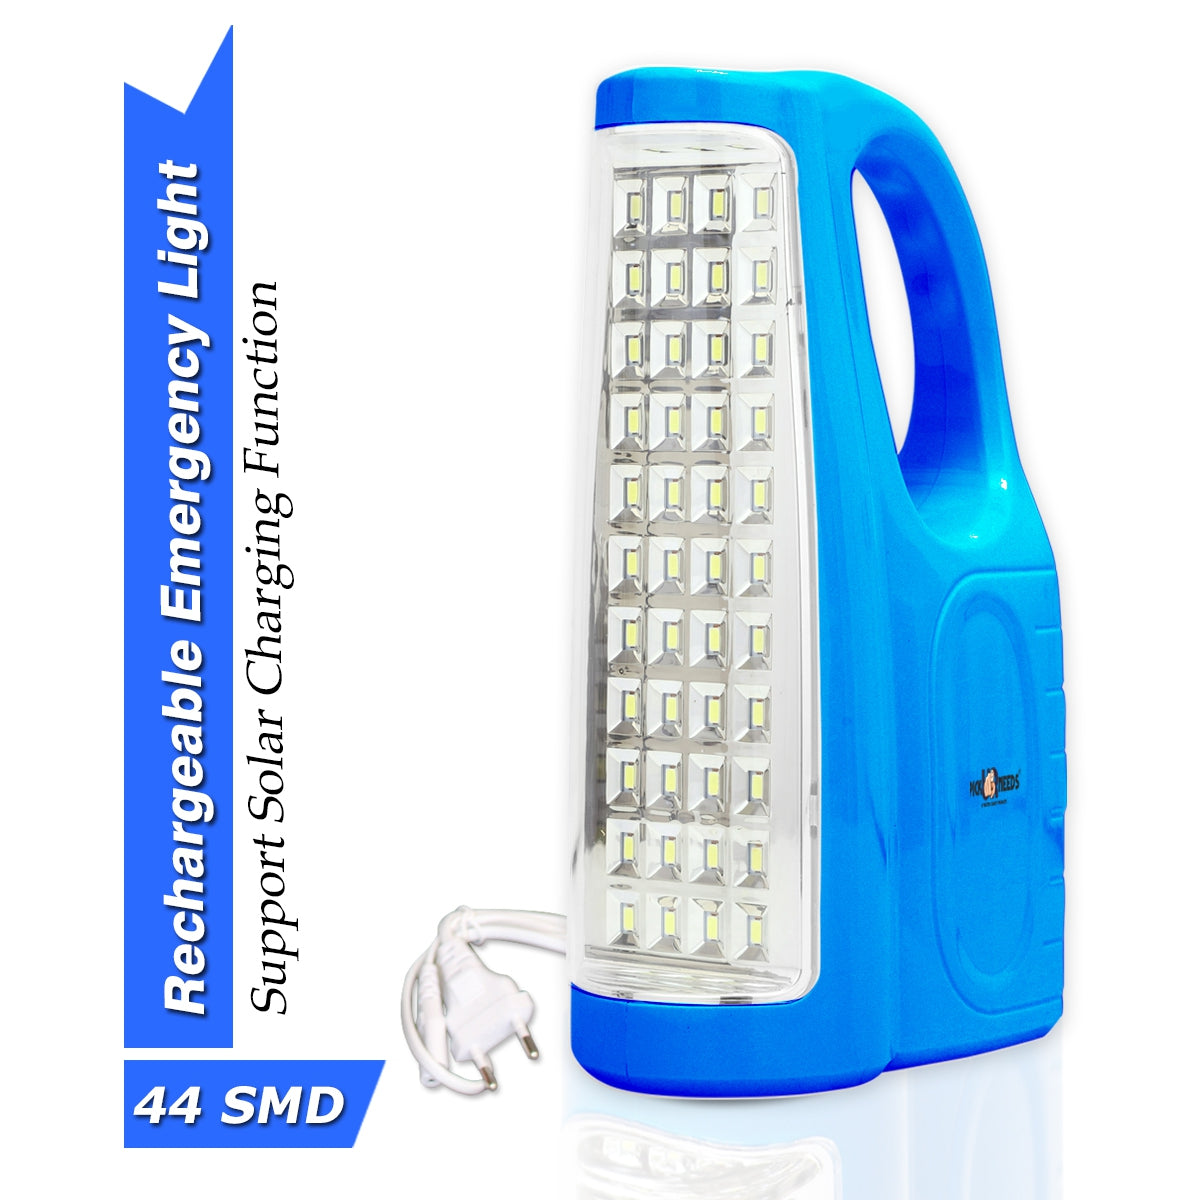 Pick Ur Needs Rechargeable LED Light Lamp Home Emergency Camping Lantern Supports Solar Charger(44 SMD)